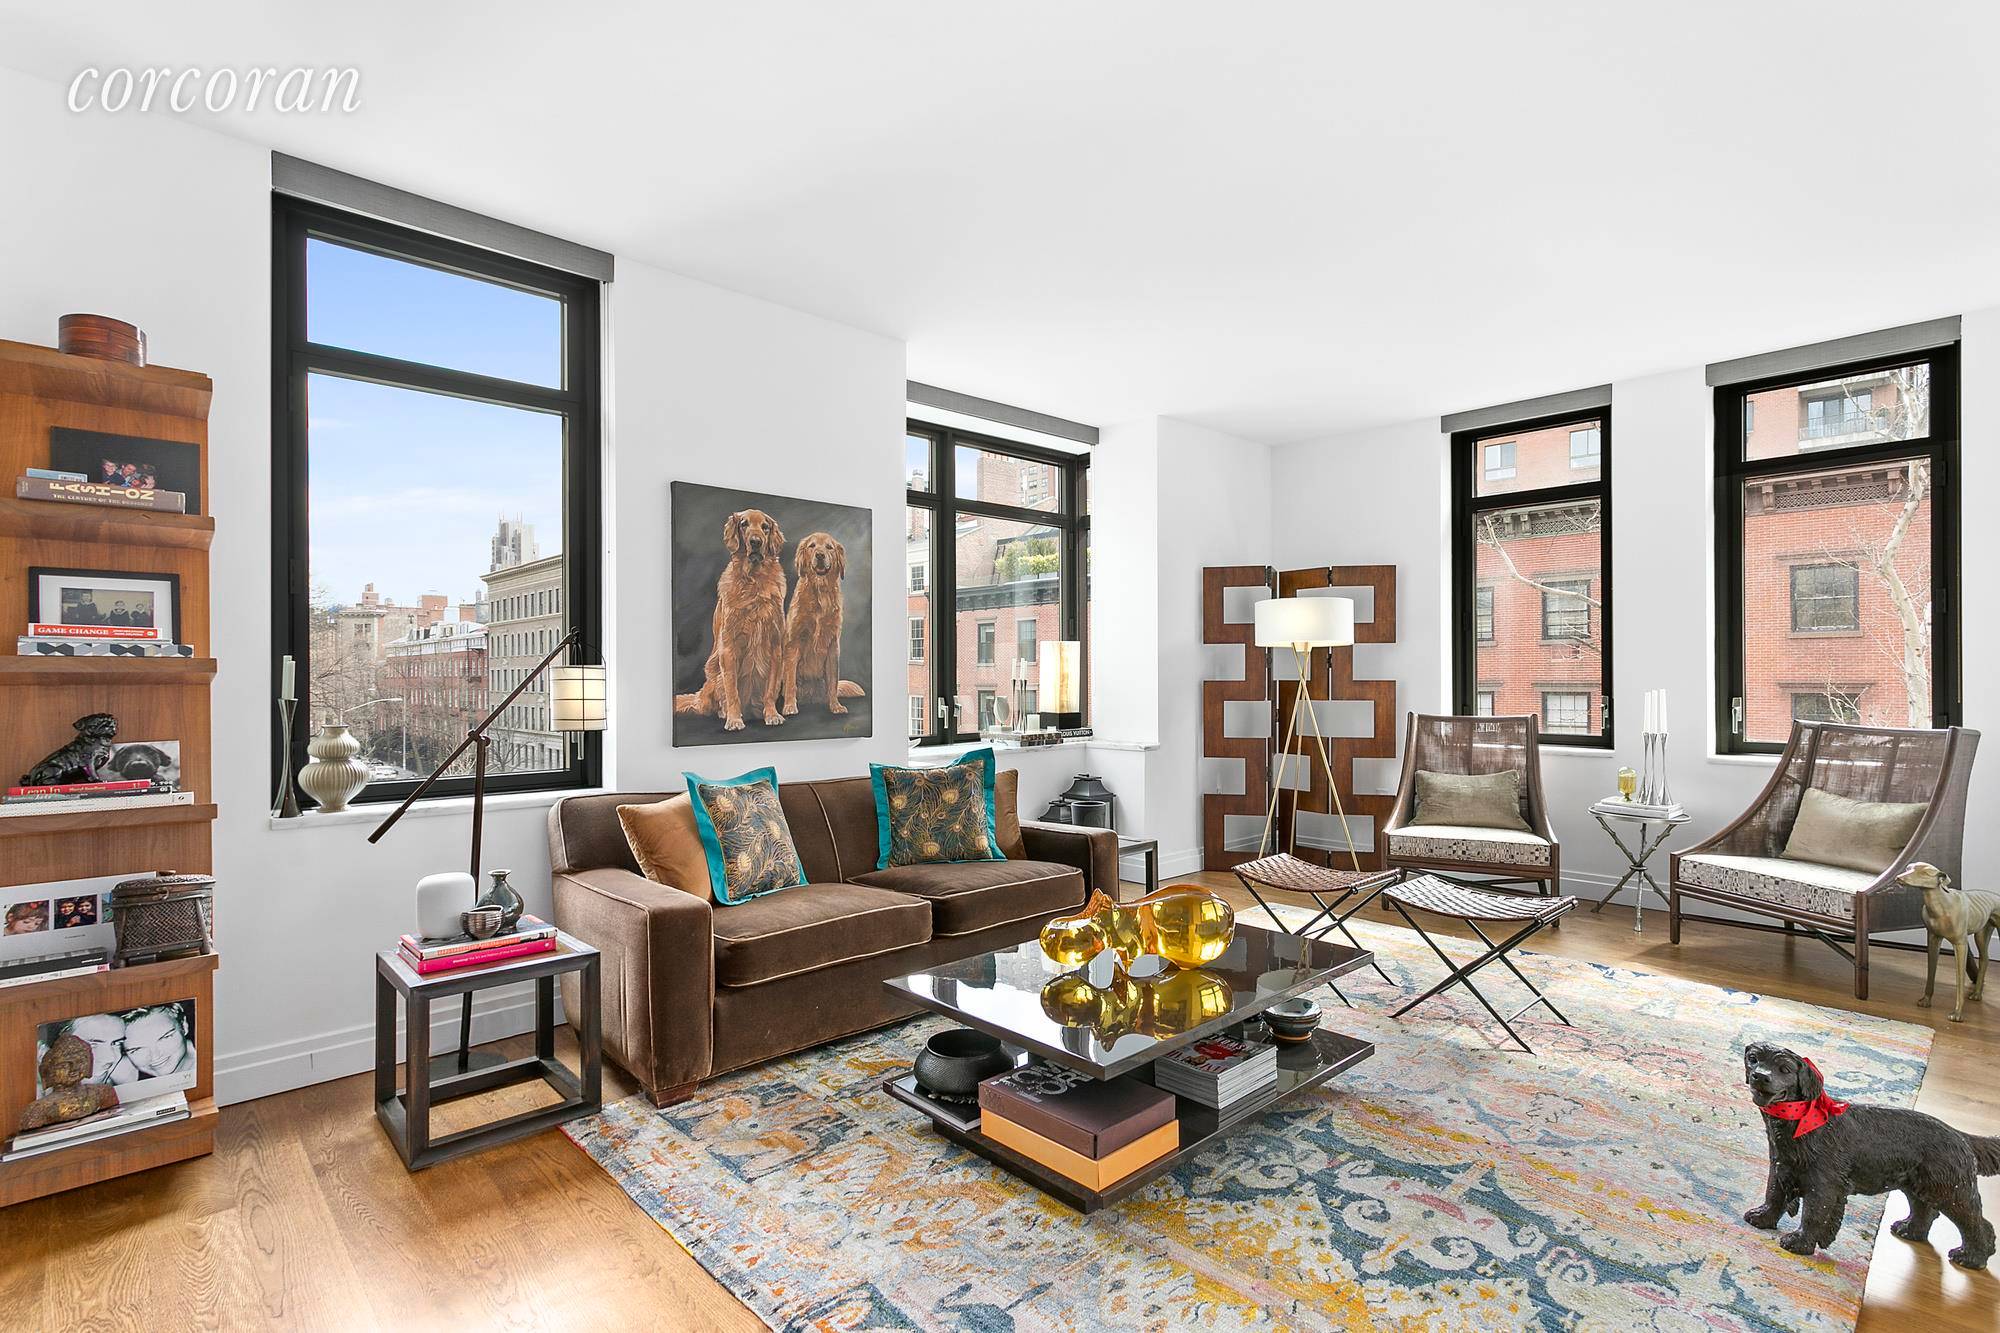 All showings by appointment only, contact agent Marie Claire Gladstone 455 West 20th Street 4A, Luxury two bedroom West Chelsea Condo with private terrace overlooking the lovely General Theological Seminary ...